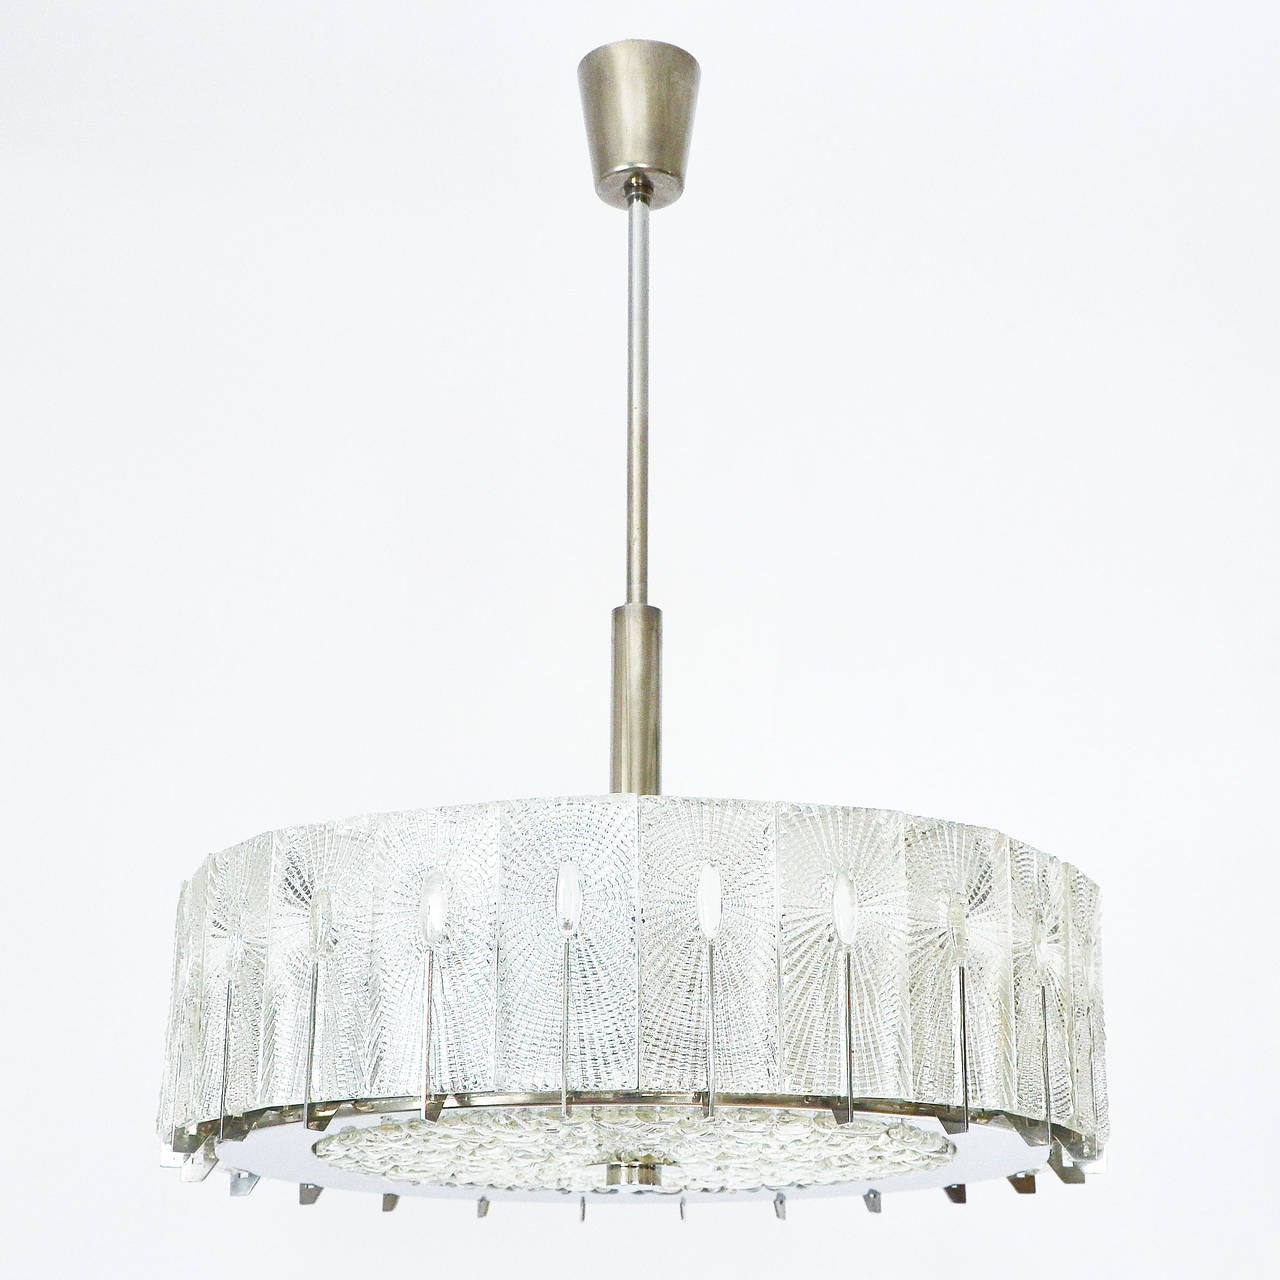 Rare and exceptional textured glass and chrome (nickel) light fixture by J.T. Kalmar from the 60s. It can be used with a stem as chandelier or with flat fixture as flush mount. We can provide this customizing for your needs without any additional